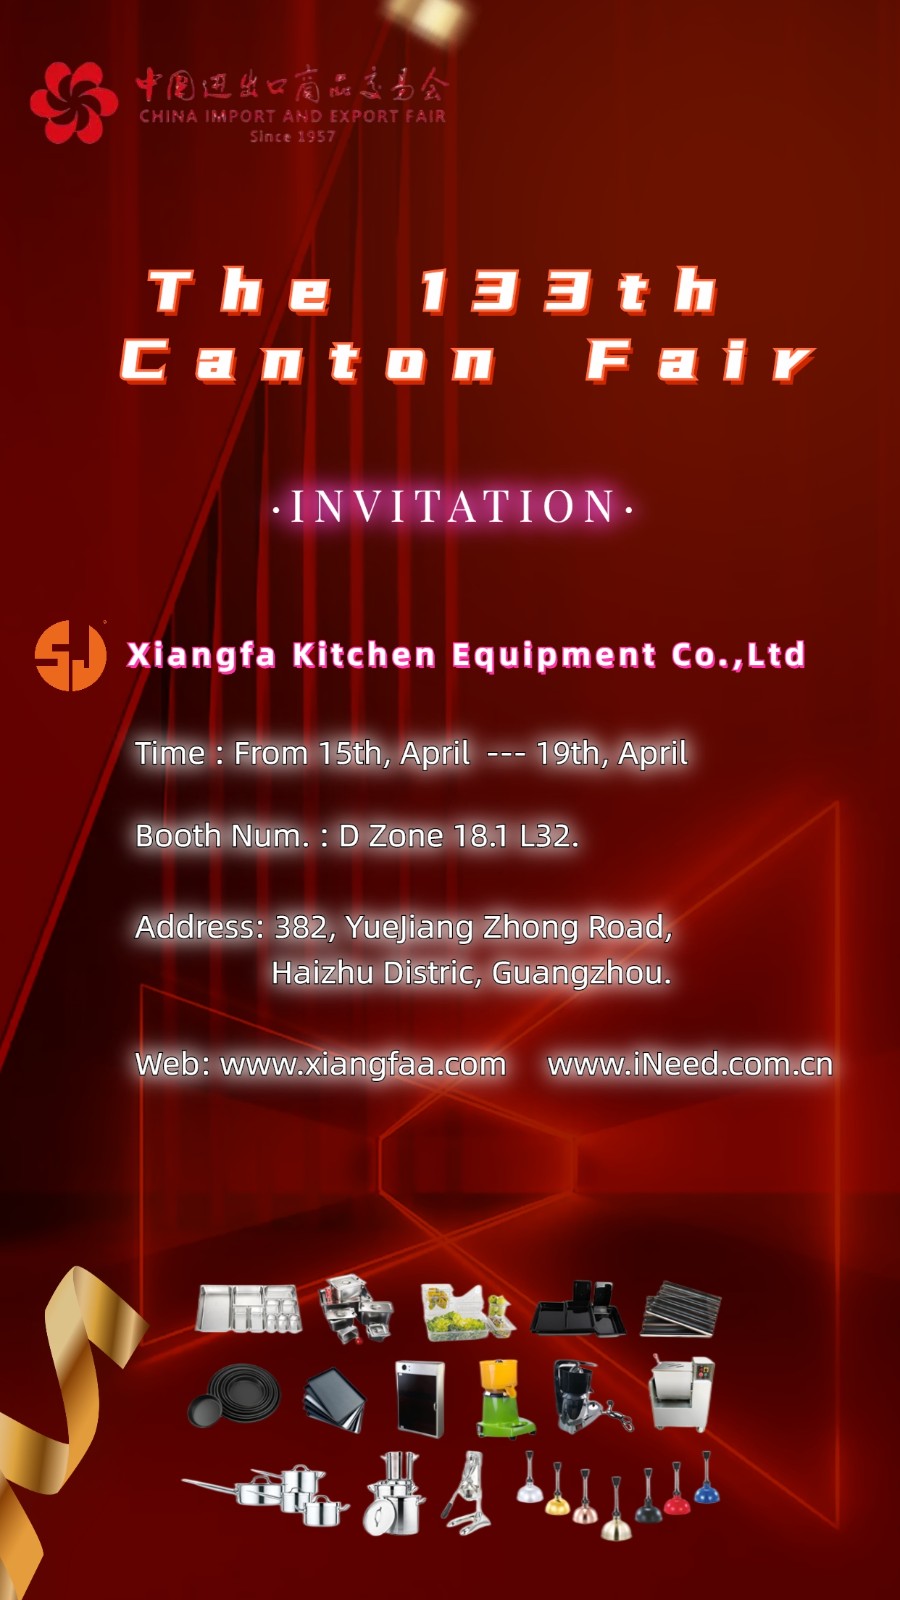 Xiangfa Kitchen Equipment Co.,Ltd will attend the Canton Fair on 15th, April